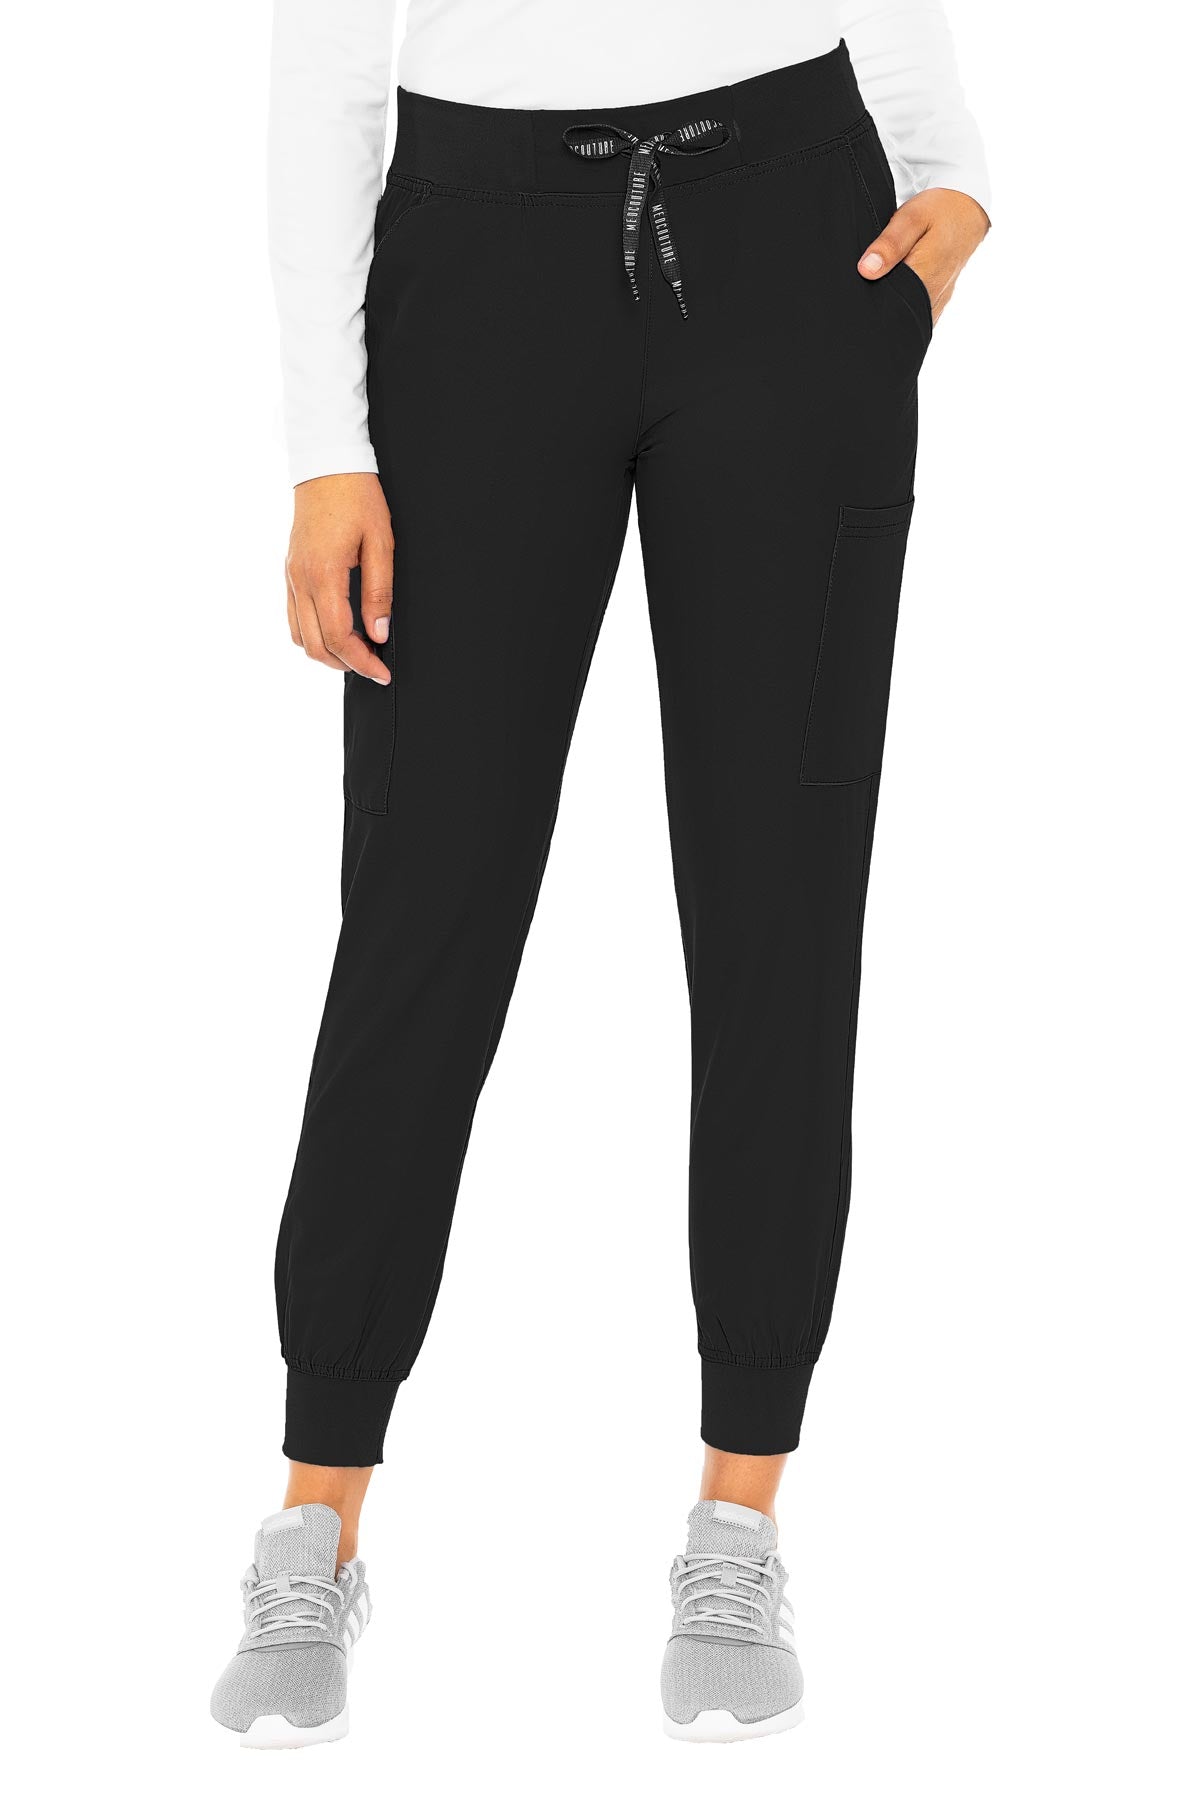 2711 Med Couture Insight Women's Jogger – The Uniform Shoppe